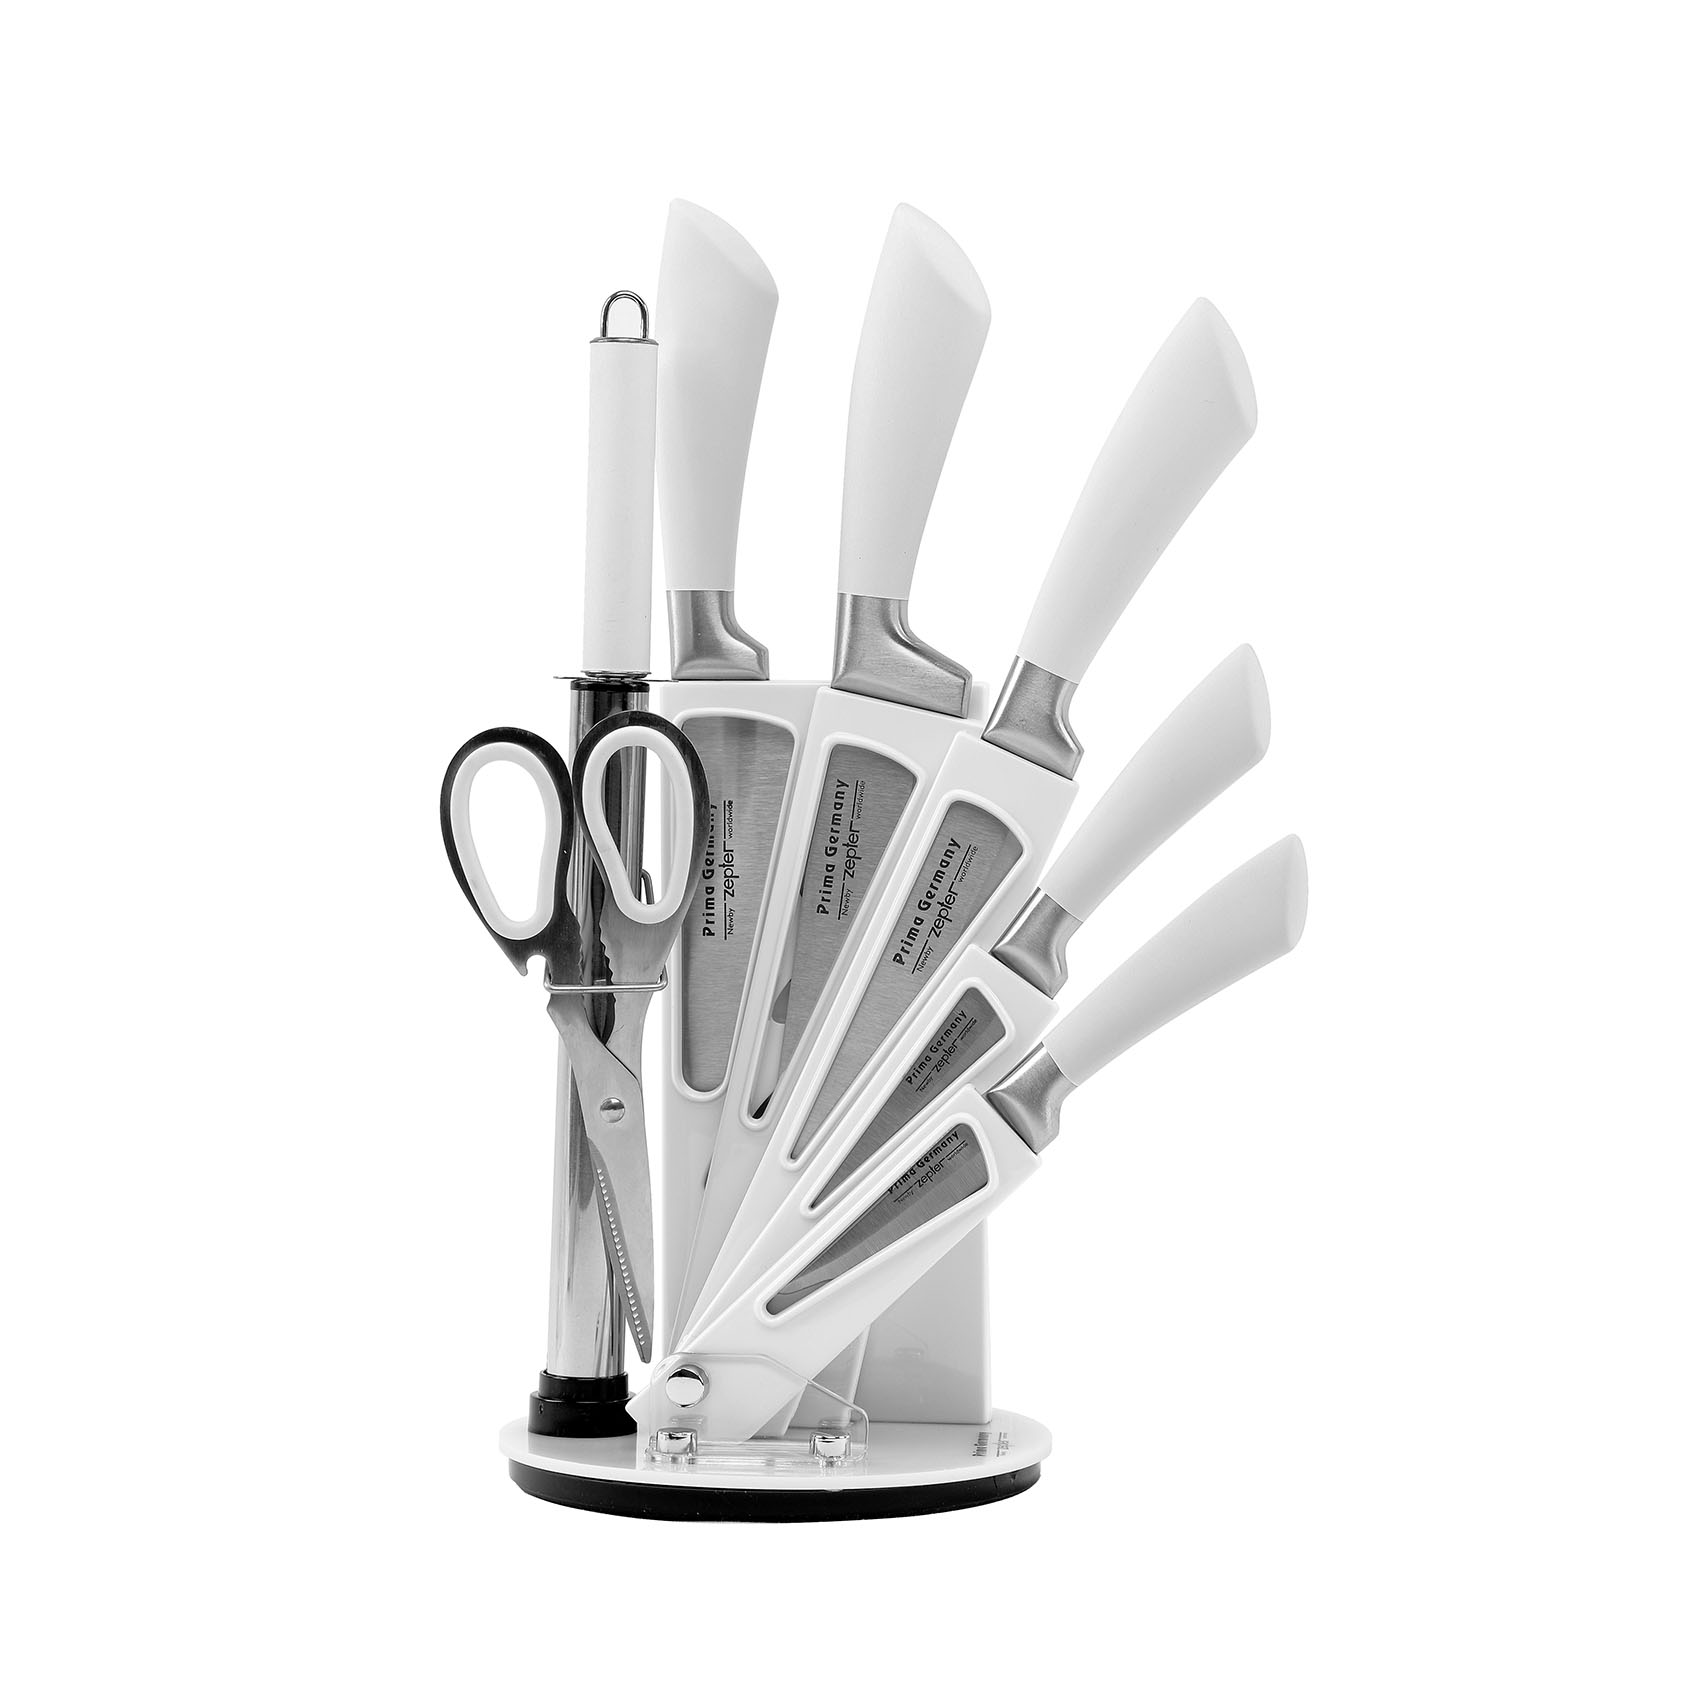 PRIMA 8pcs Knife Set with Rotating Holder stand -Stainless Steel 5 Kitchen Knives along with Scissor and Knife Sharpener and 360 ROTATING HOLDER- WHITE HANDLE KNF-4